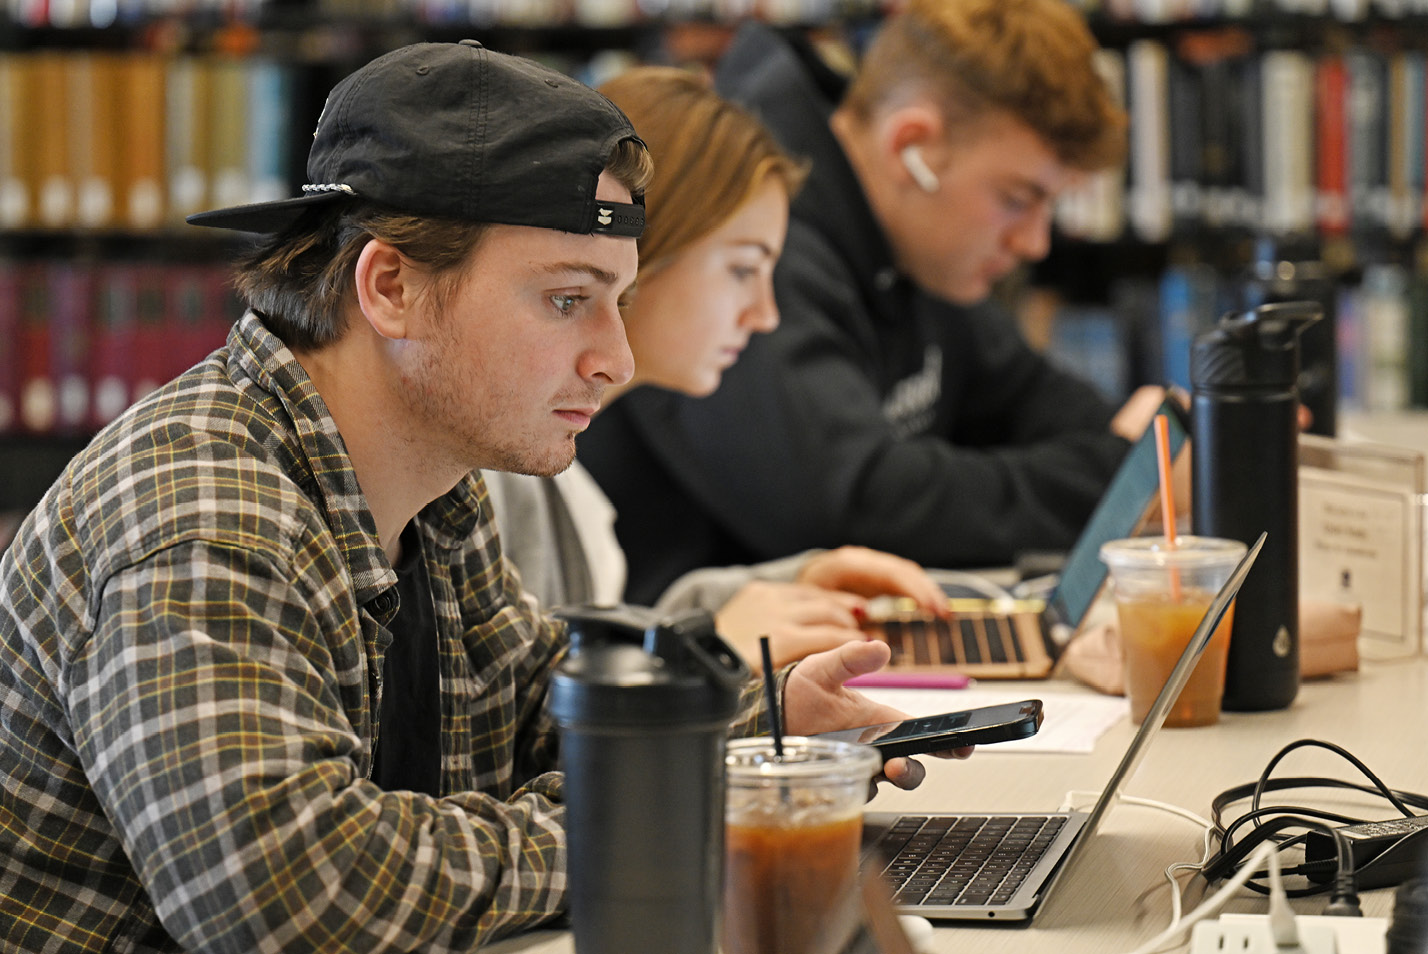 Students studying in Shain Library during finals.